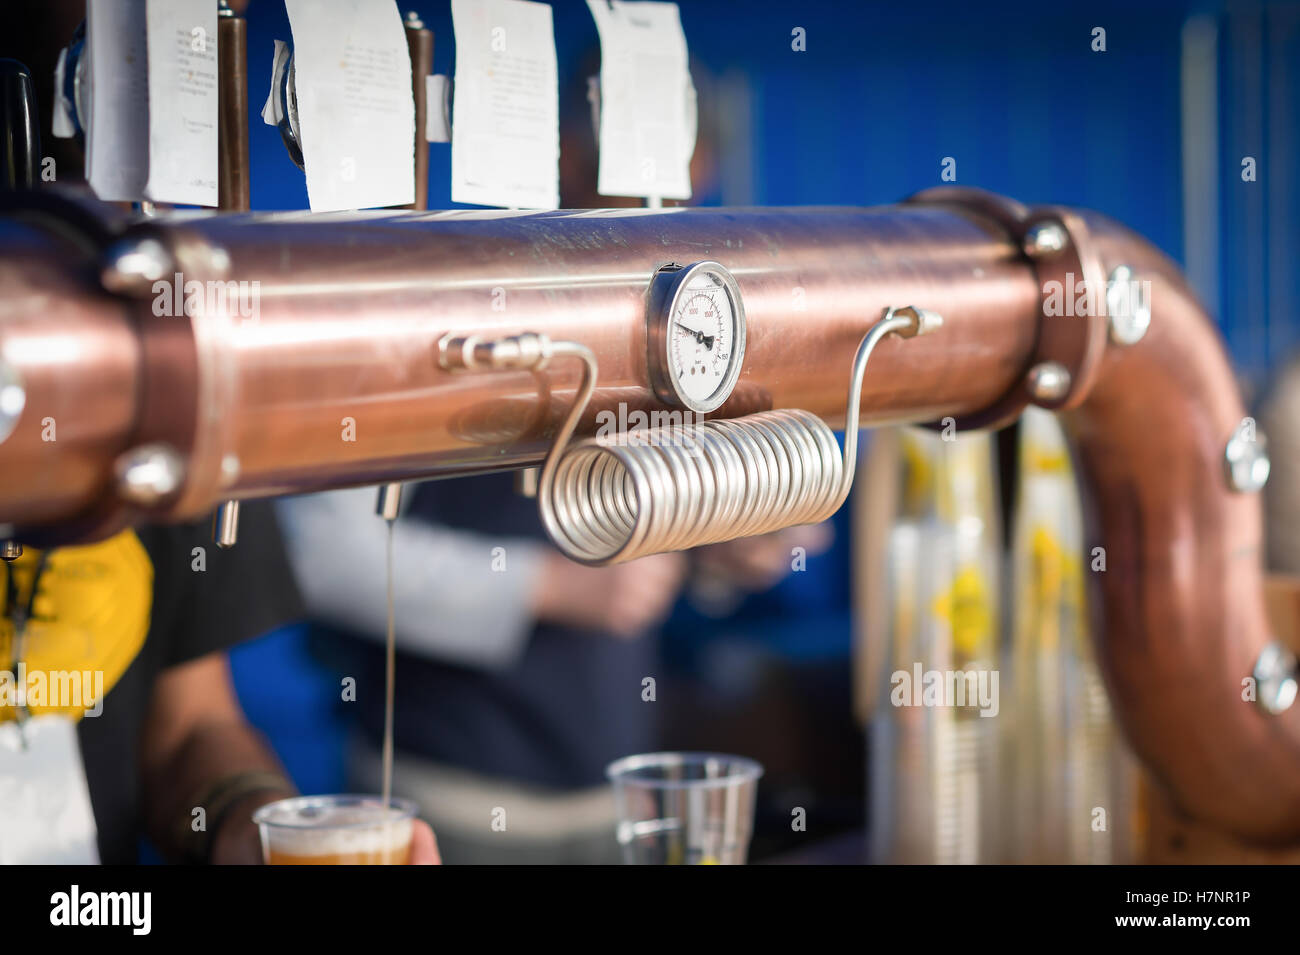 Detail of the draft beer system. Pressure gauge and drain pressure. Stock Photo